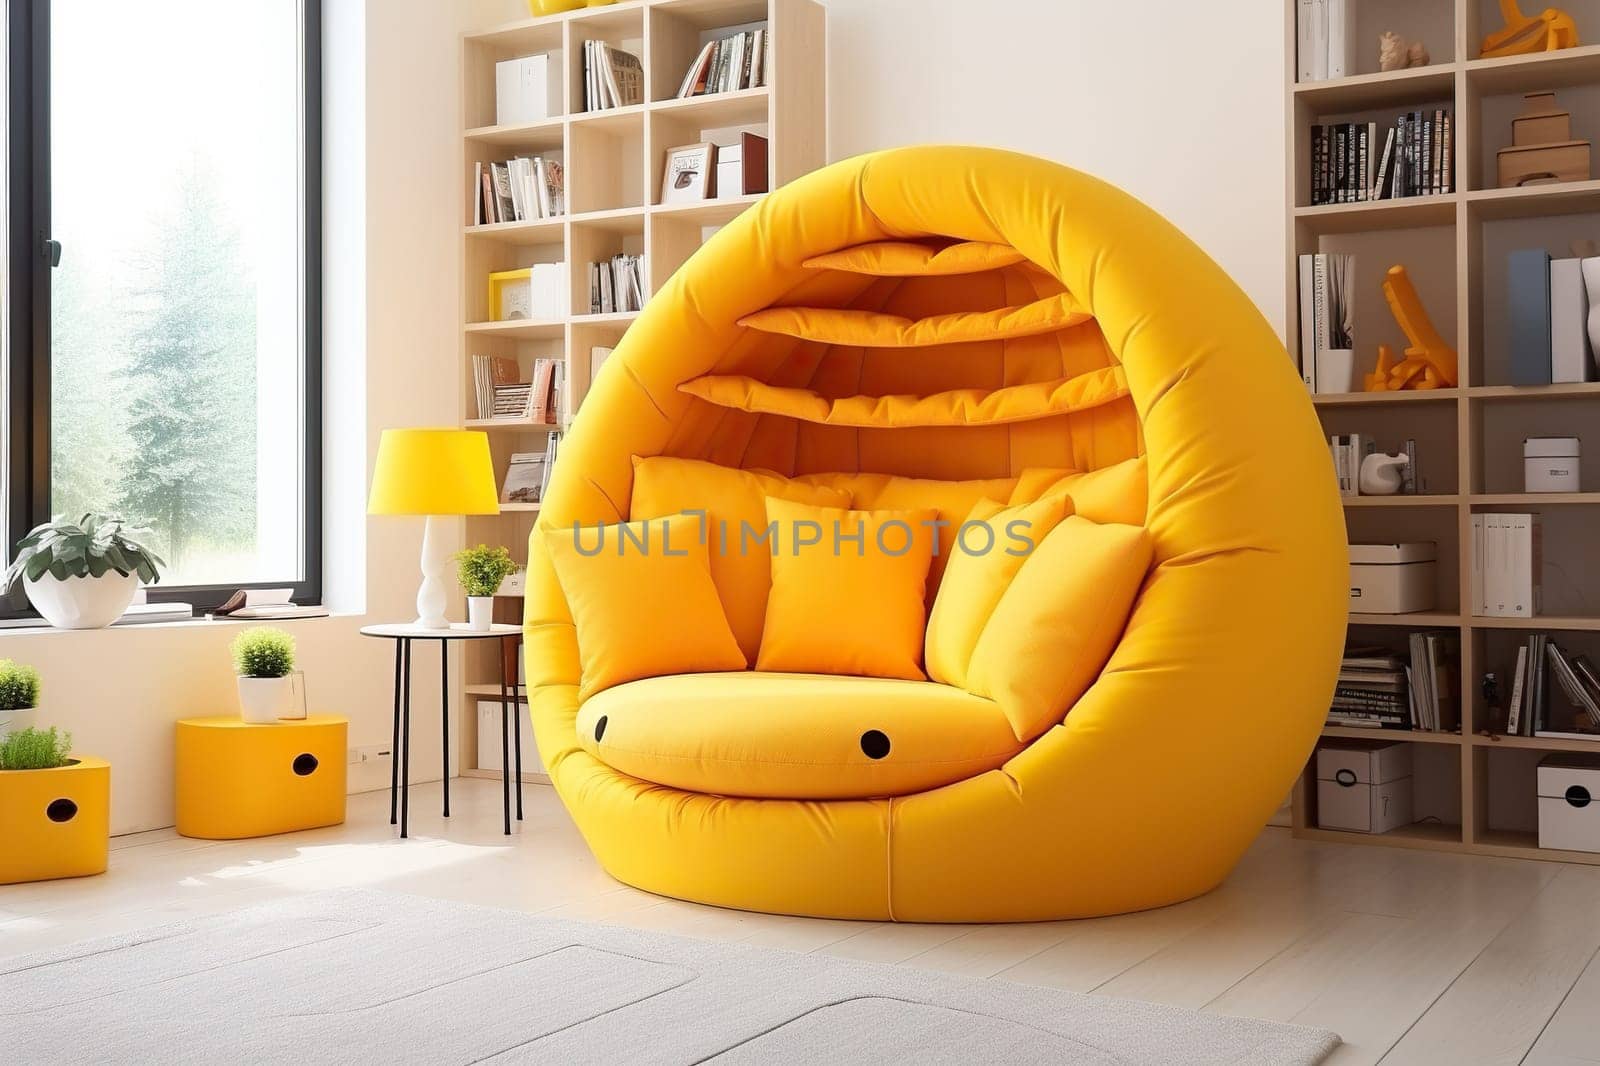 Yellow designer stylish chair in the interior of a bright room.